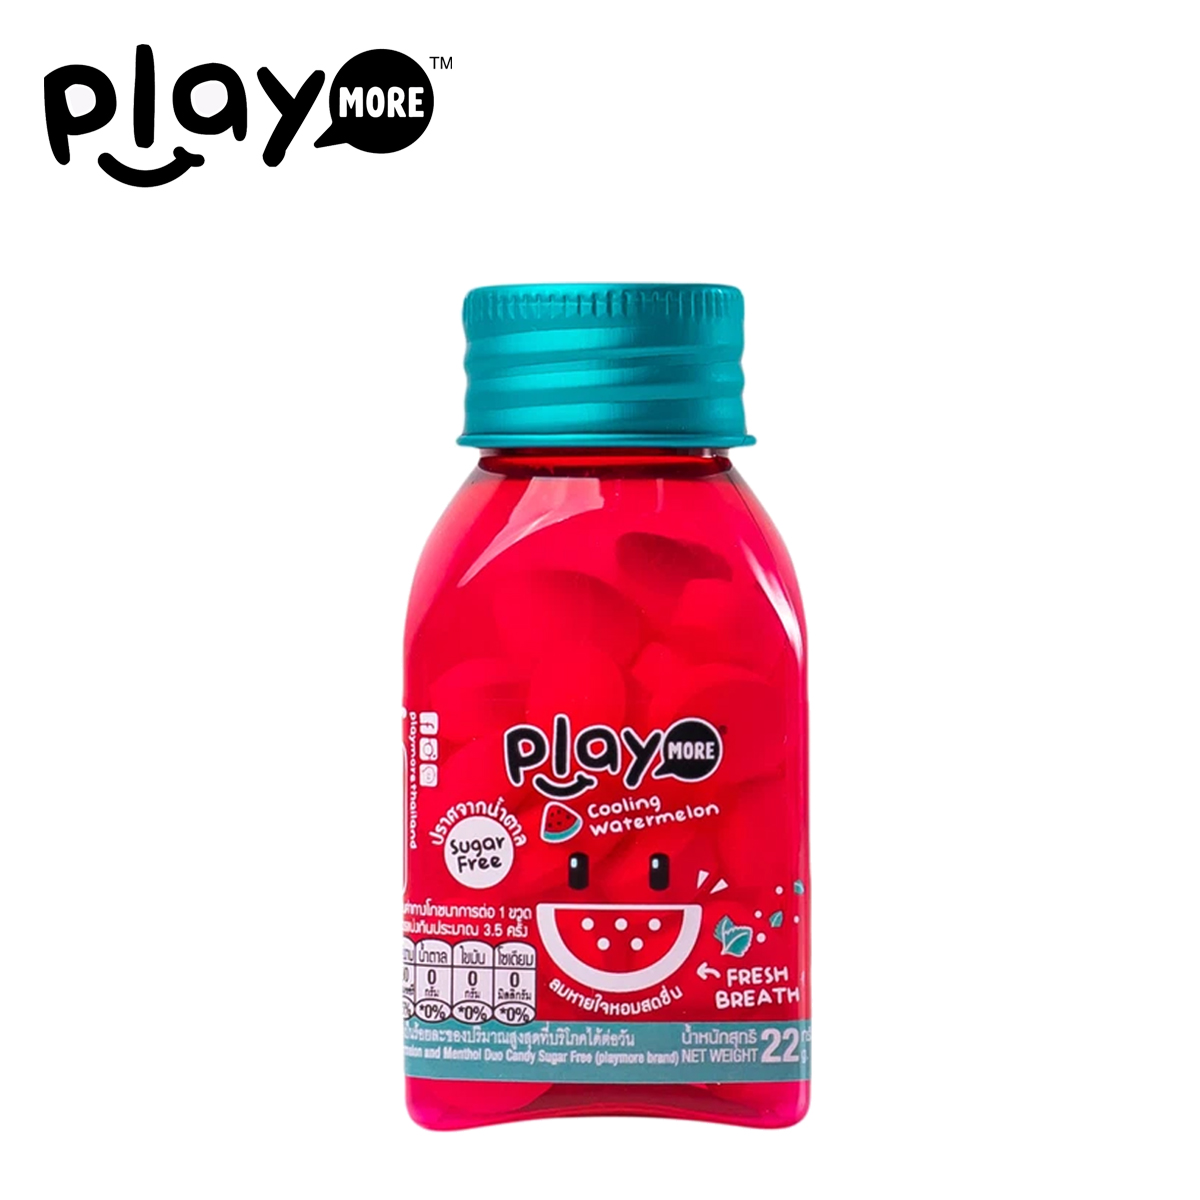 KẸO THE VỊ DƯA HẤU WATERMELON AND MENTHOL DUO CANDY SUGAR FREE PLAYMORE 22